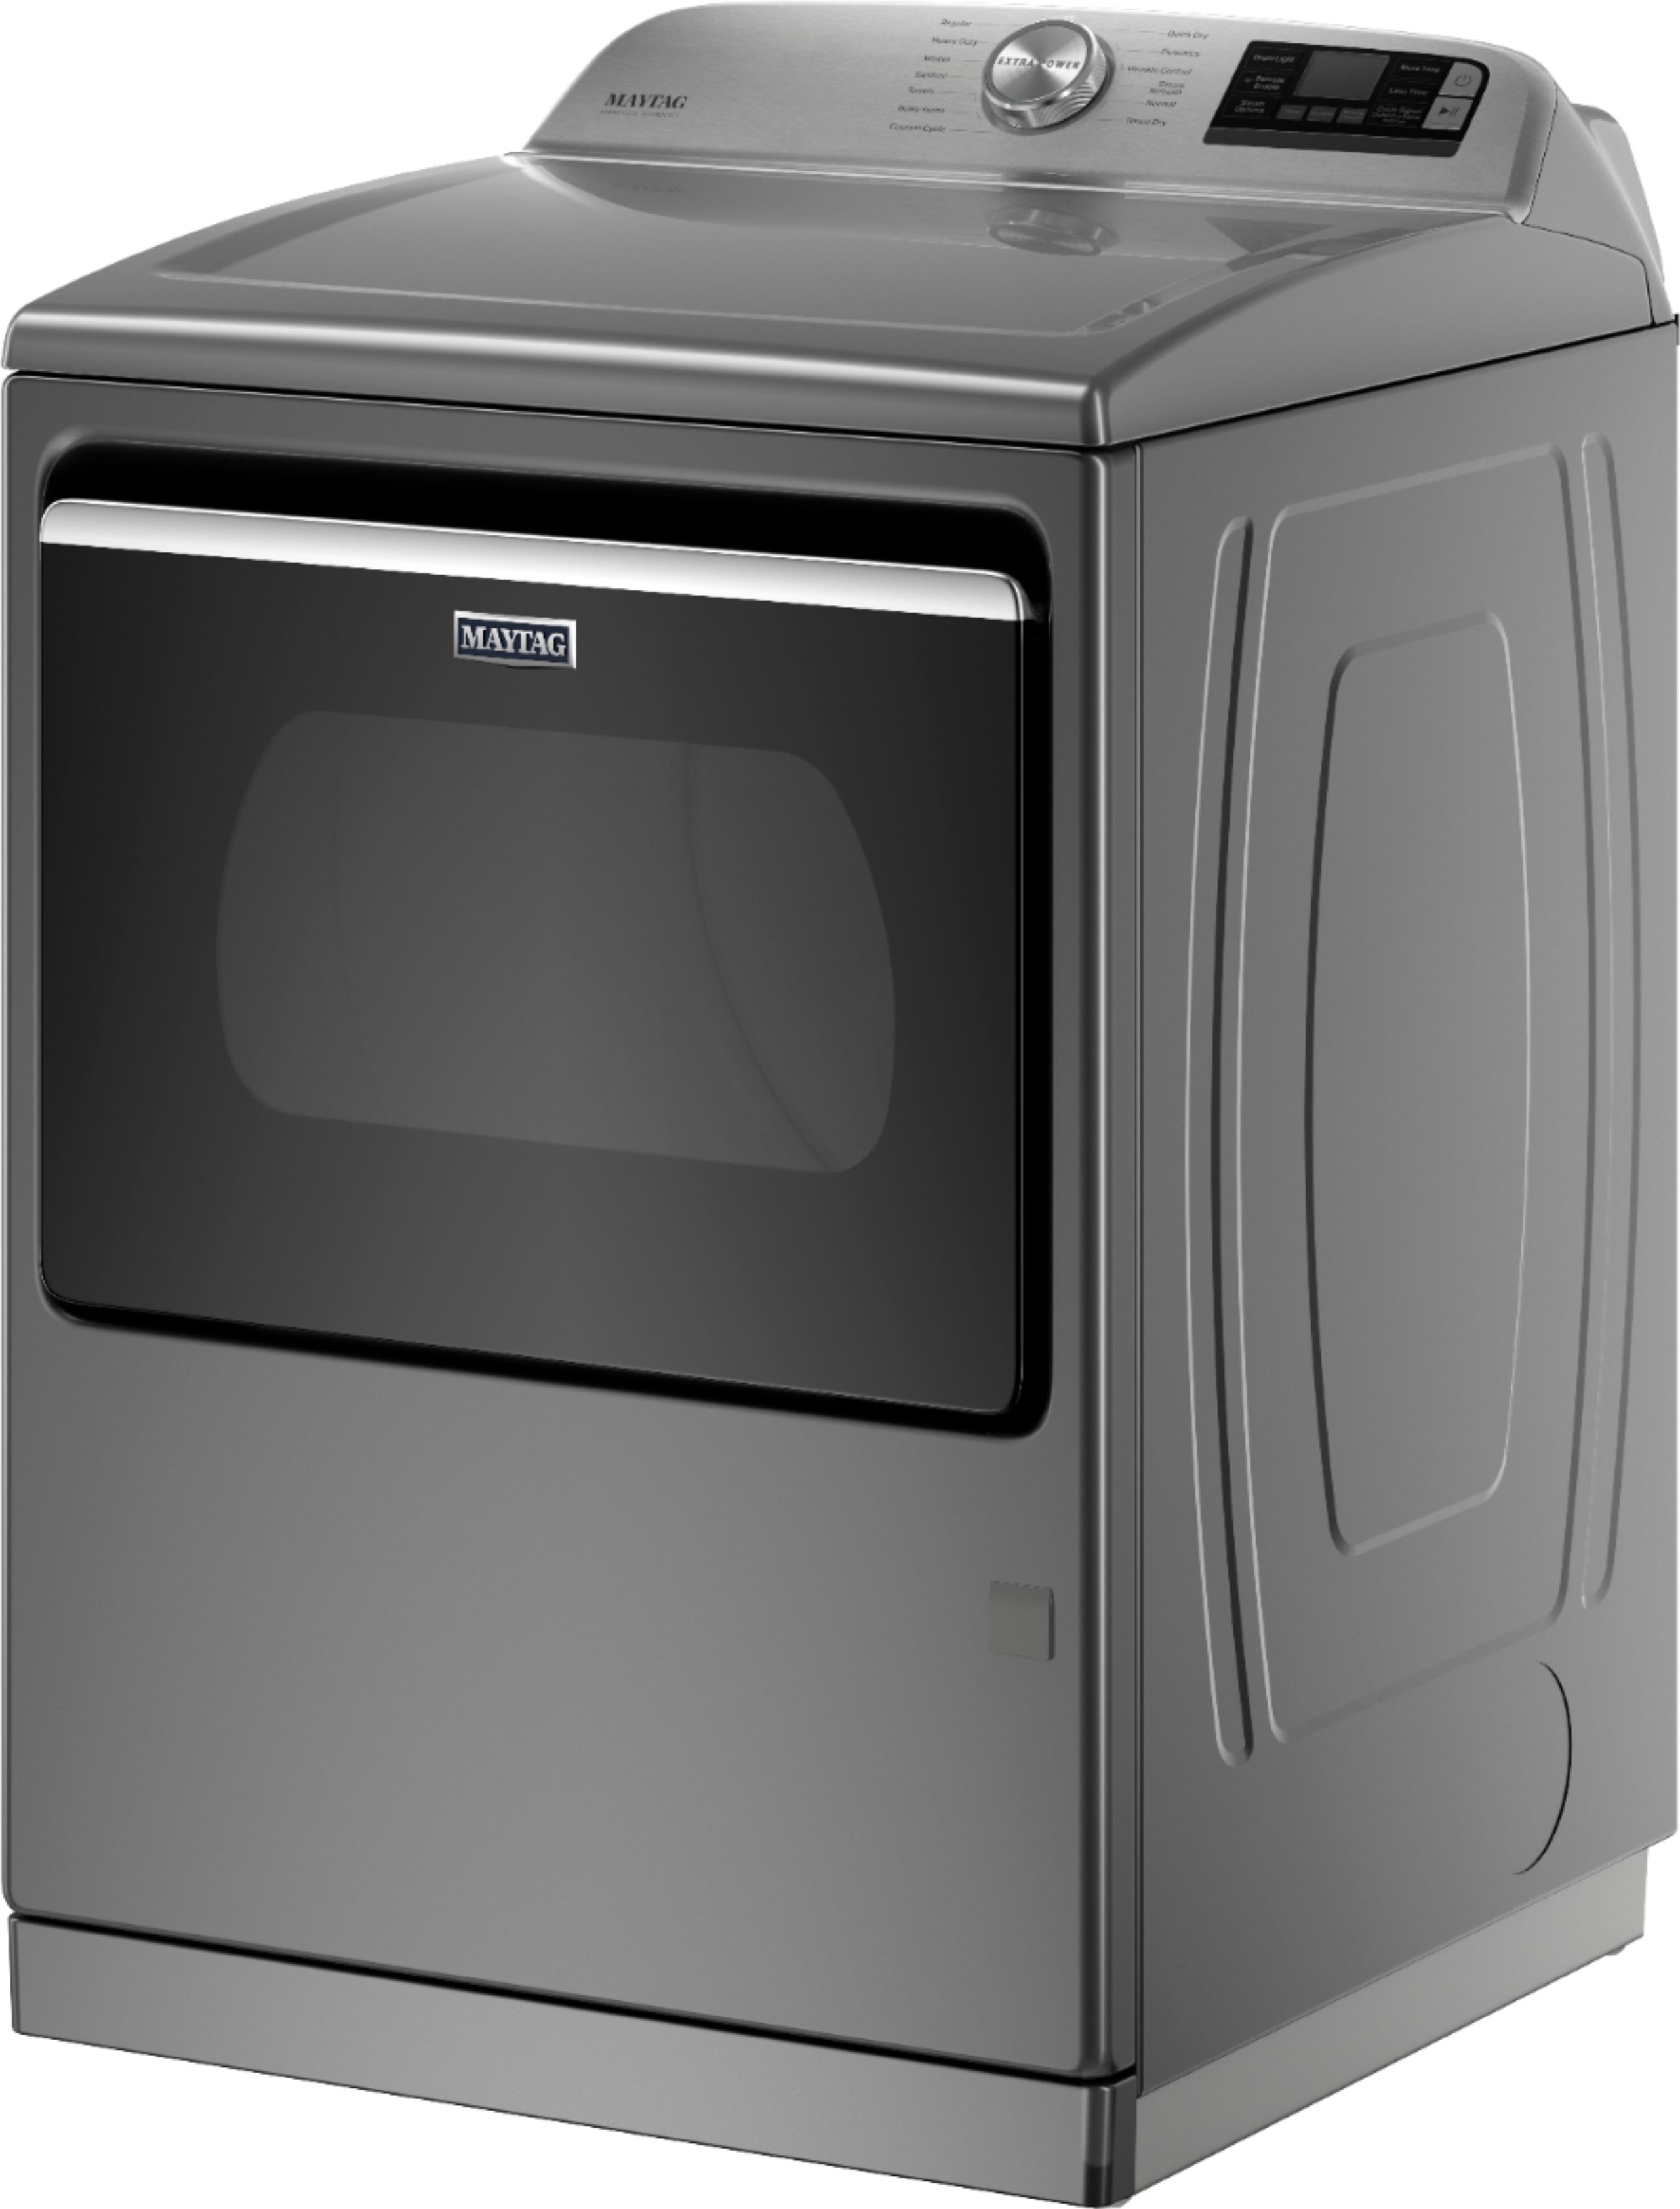 Left View: Maytag - 7.4 Cu. Ft. Smart Gas Dryer with Steam and Extra Power Button - Metallic slate